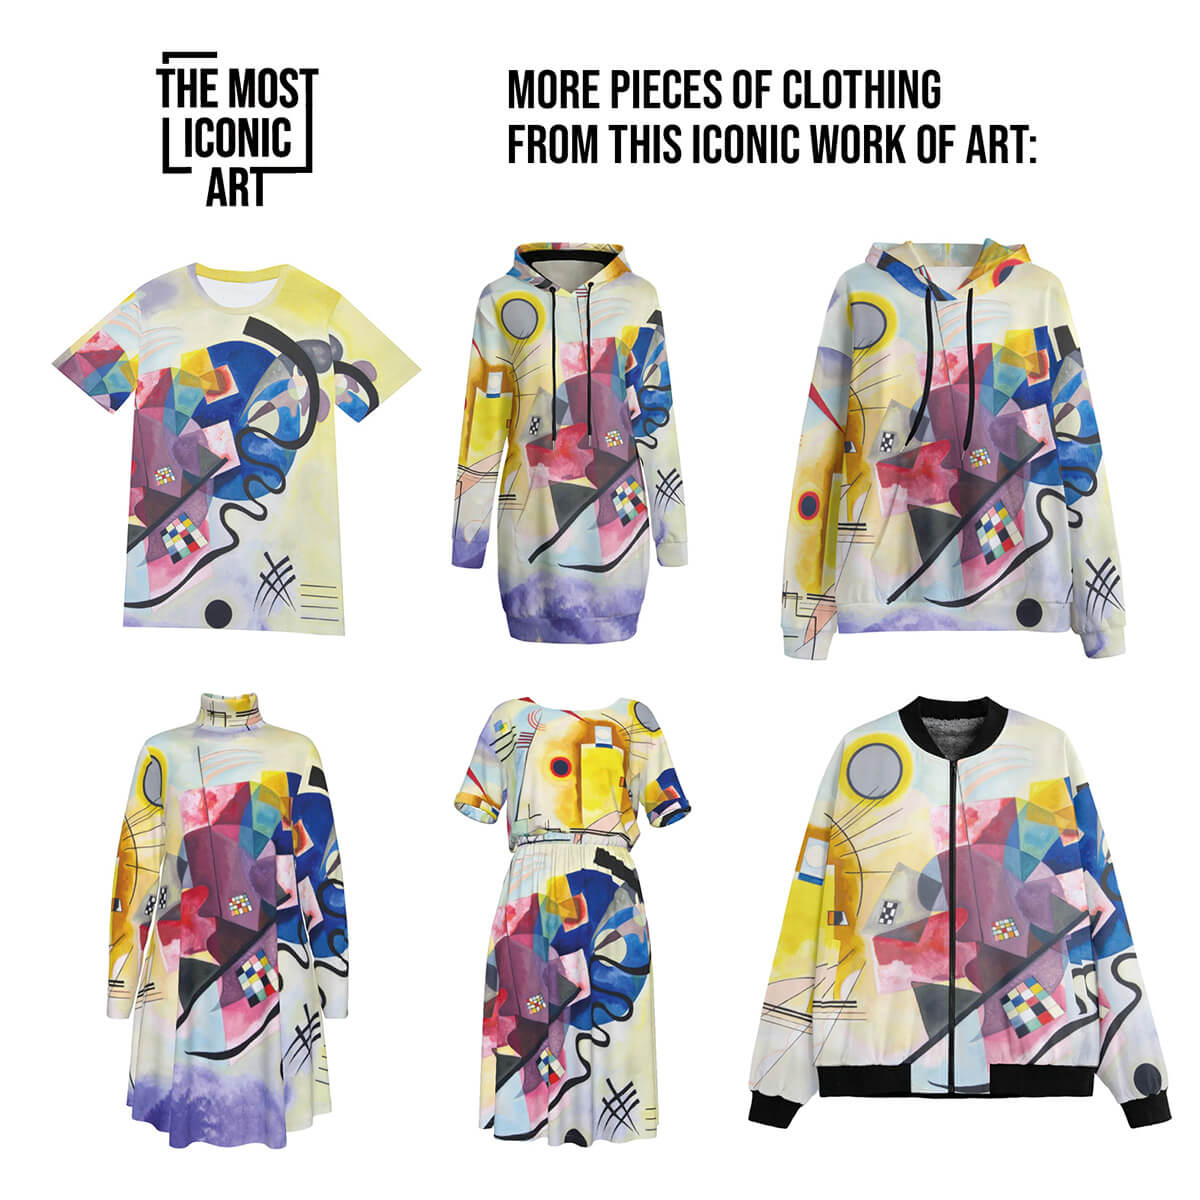 Vibrant lapel shirt dress inspired by Wassily Kandinsky's masterpiece "Yellow-Red-Blue"